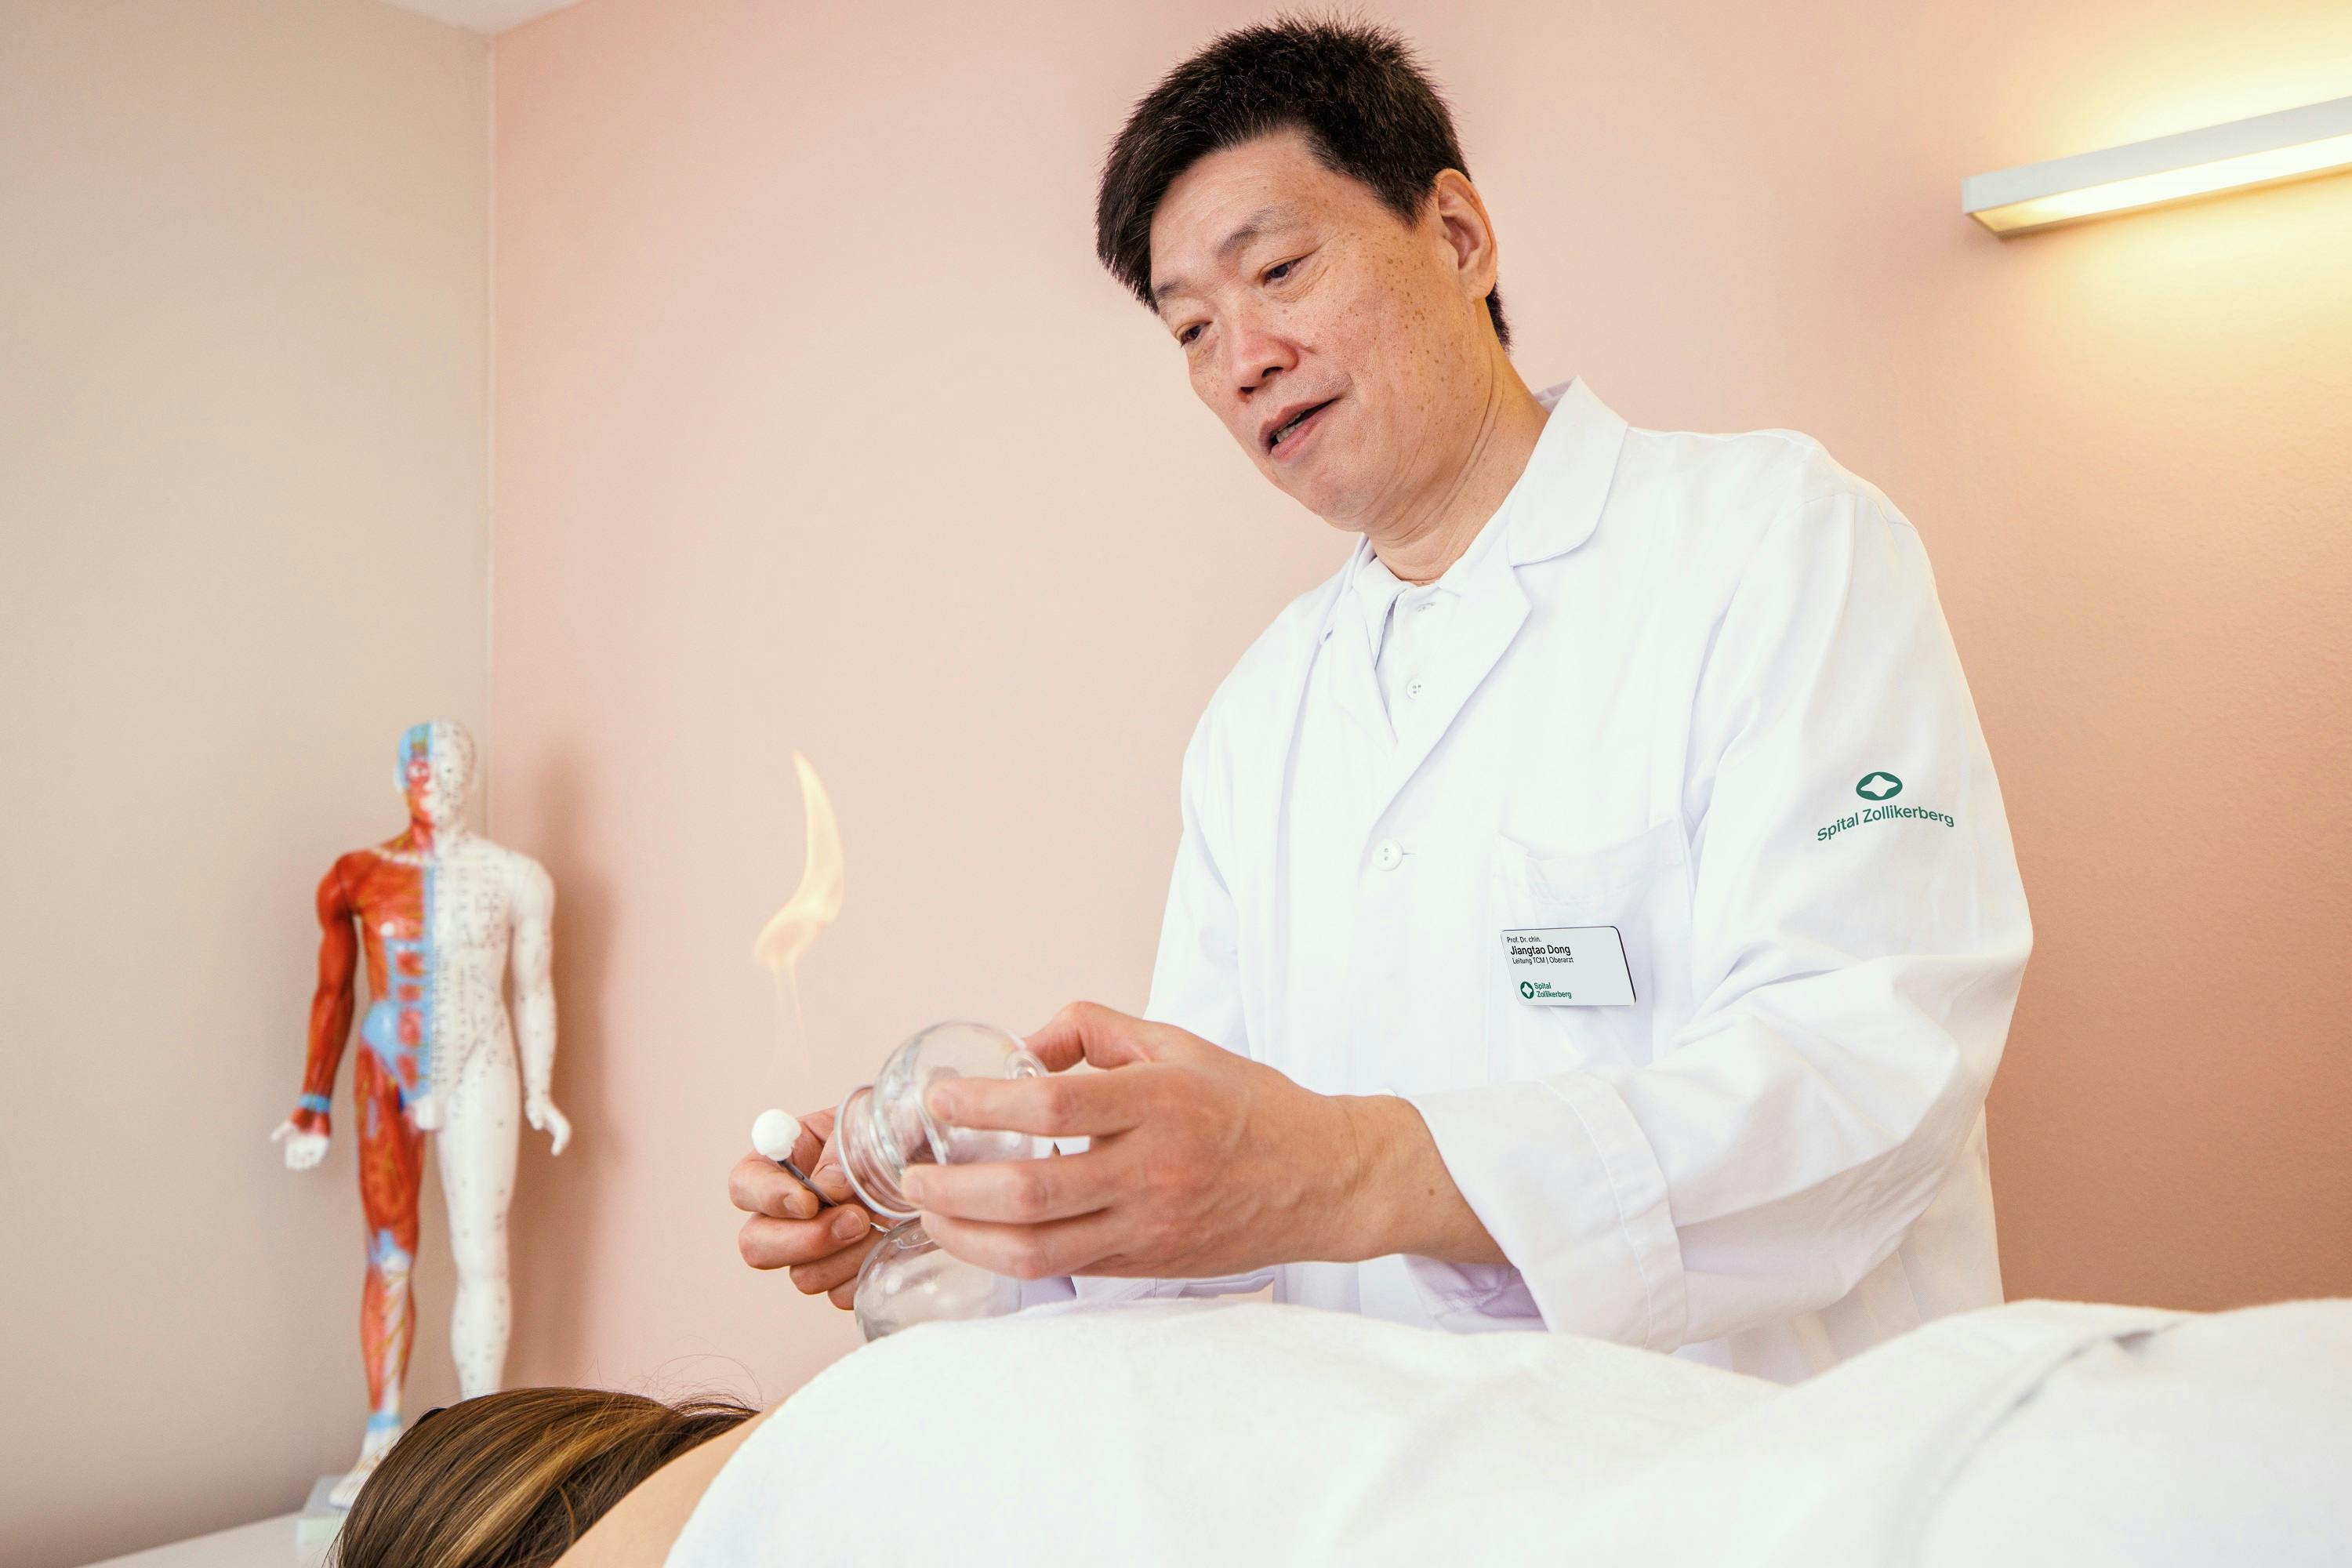 Alternative description: Asian doctor performs cupping therapy on a patient.